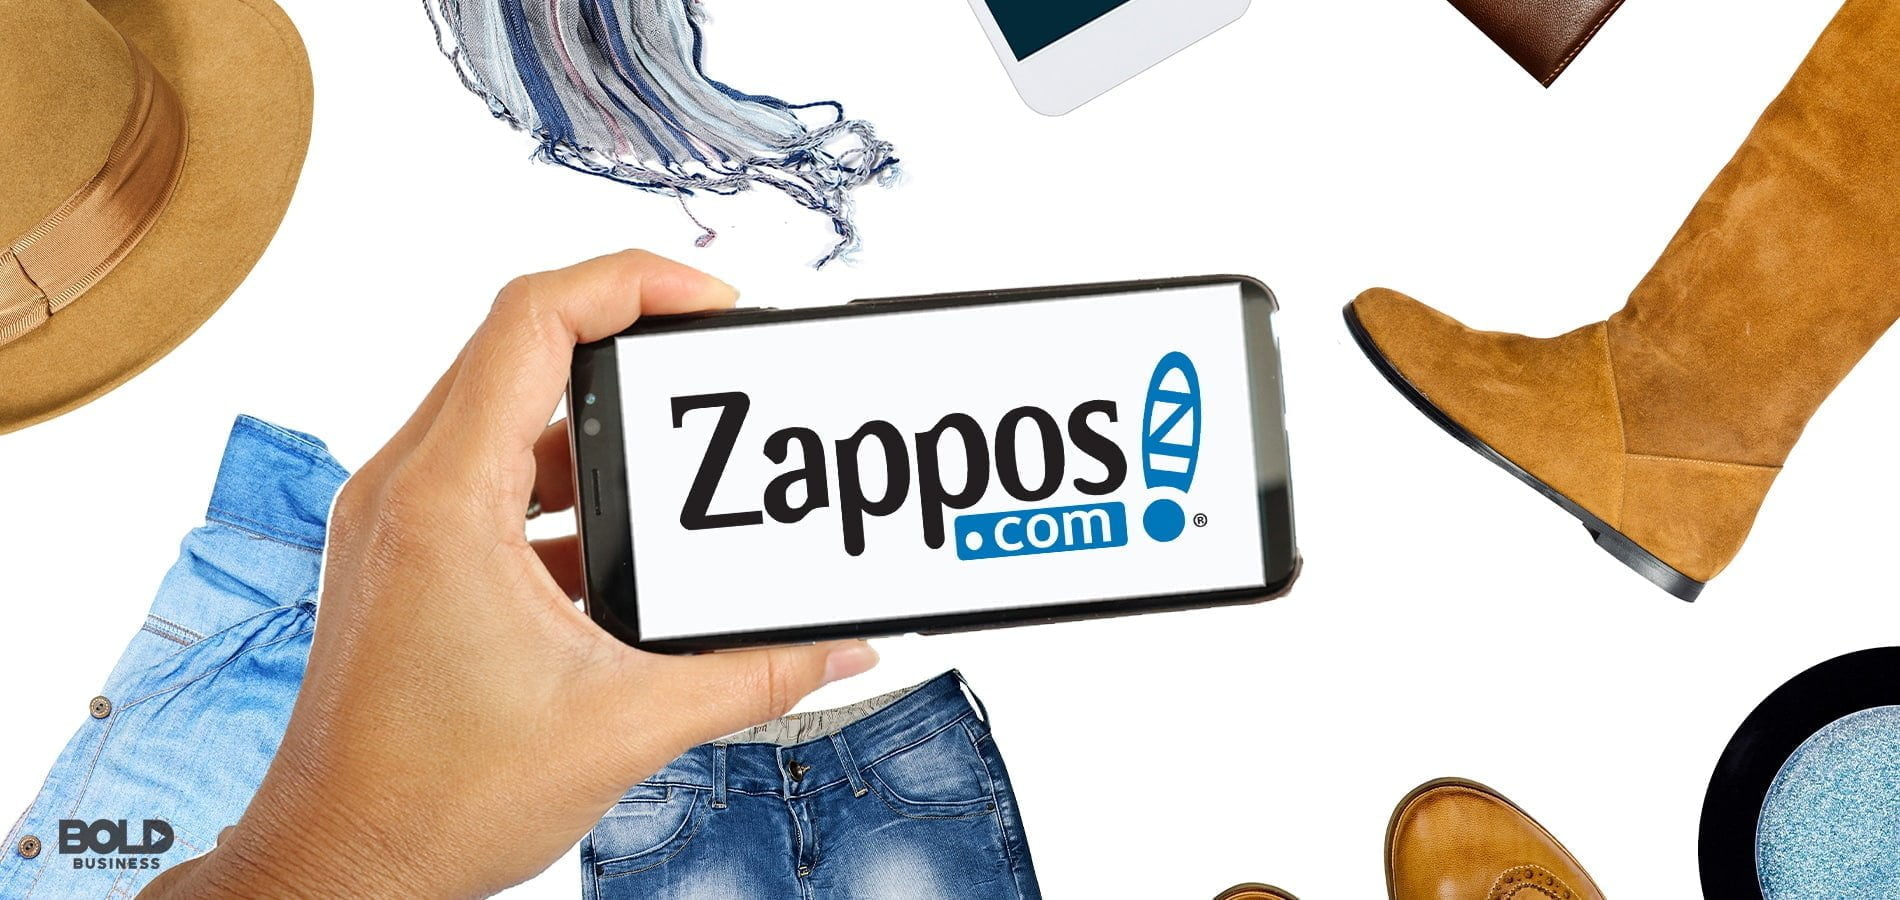 Zappos.com offers free shipping, free returns, a 365-day return policy and 24/7 support